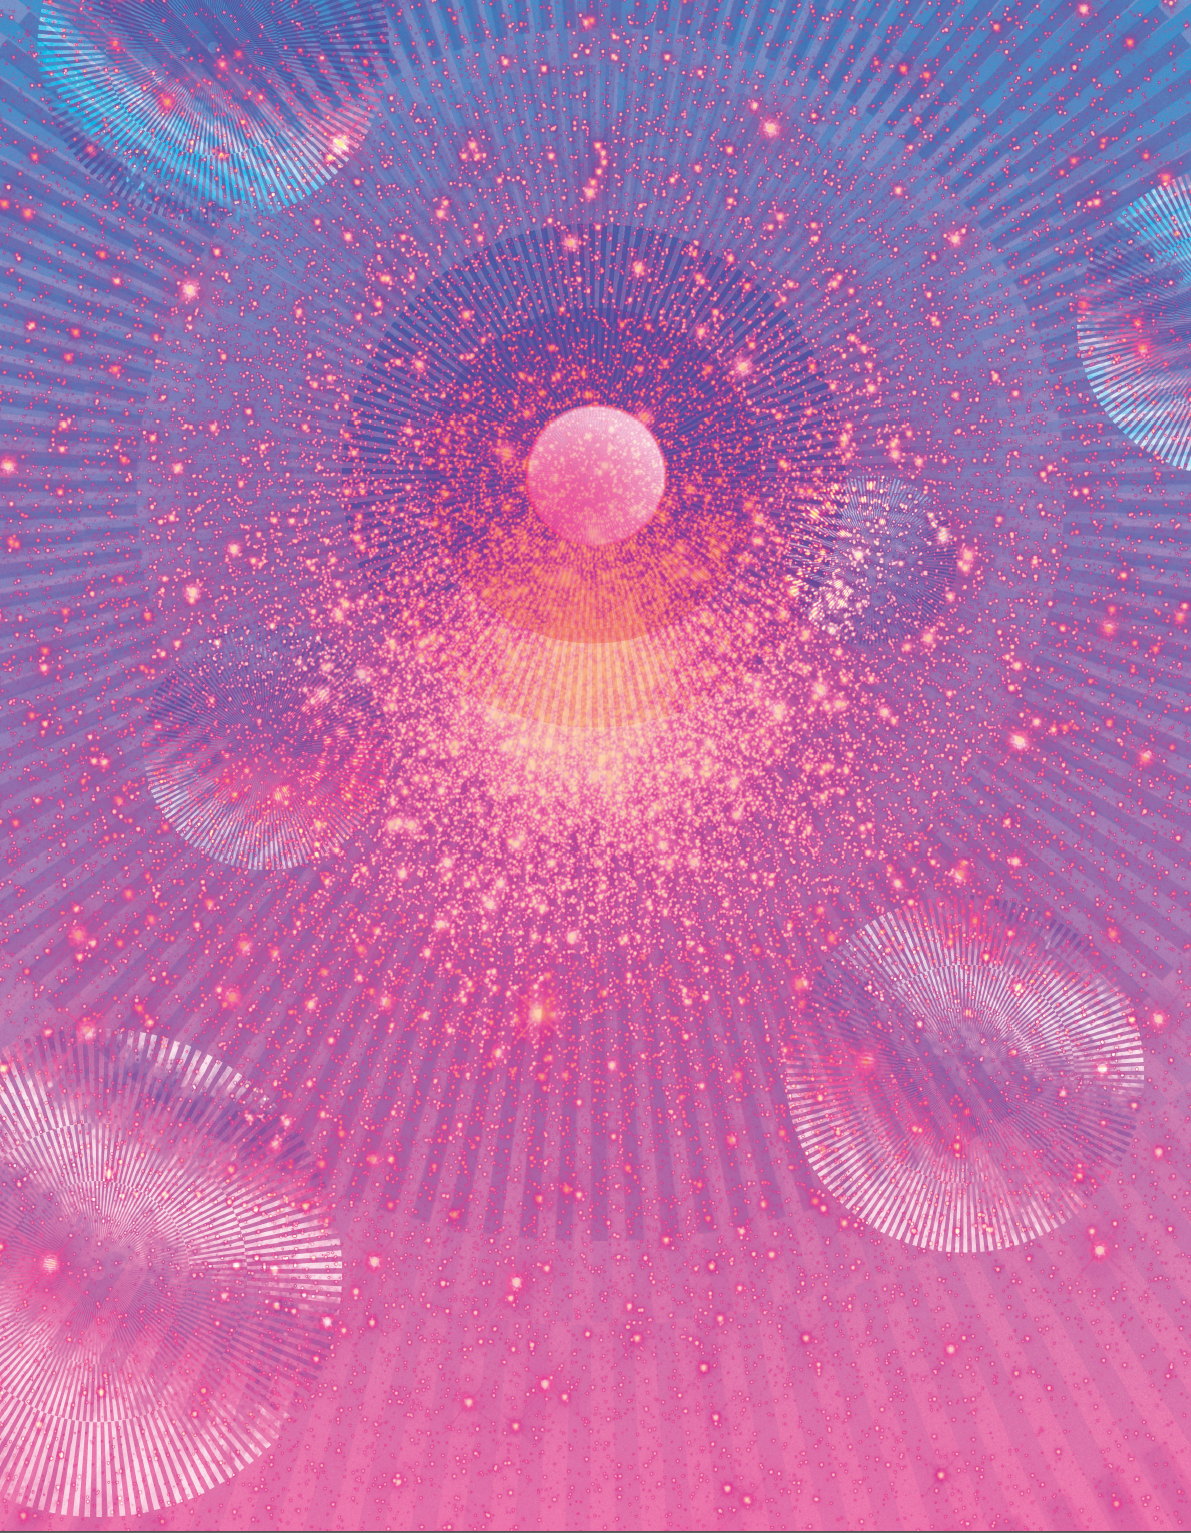 An abstract image of bubbles and dots and rays of sunshine in a blue and pink color palette